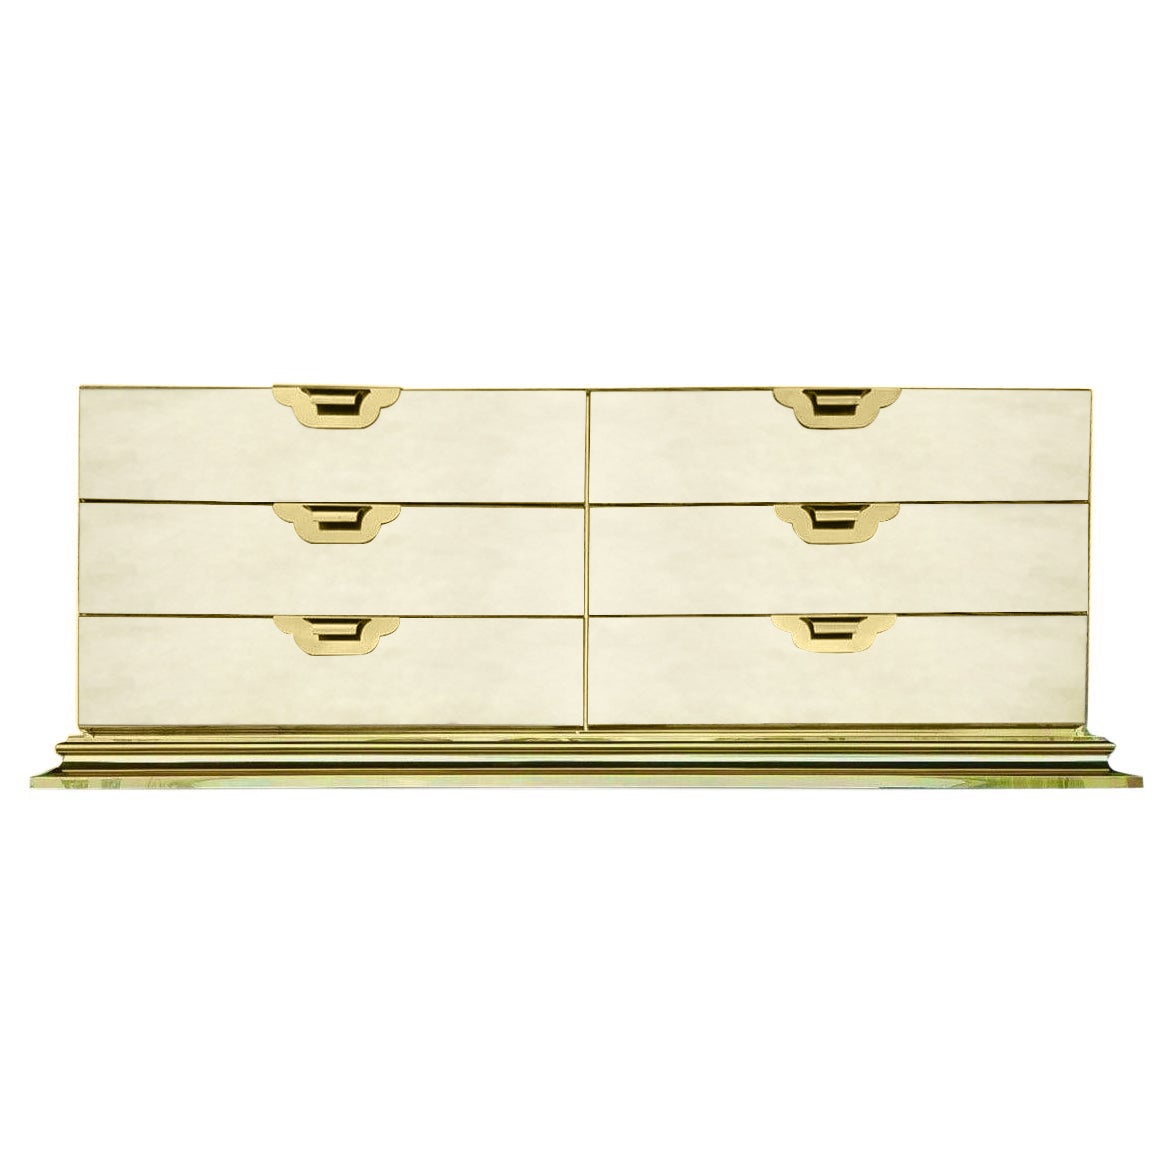 Ello Brass & Bronzed Mirrored Chest of Drawers by O. B. Solie